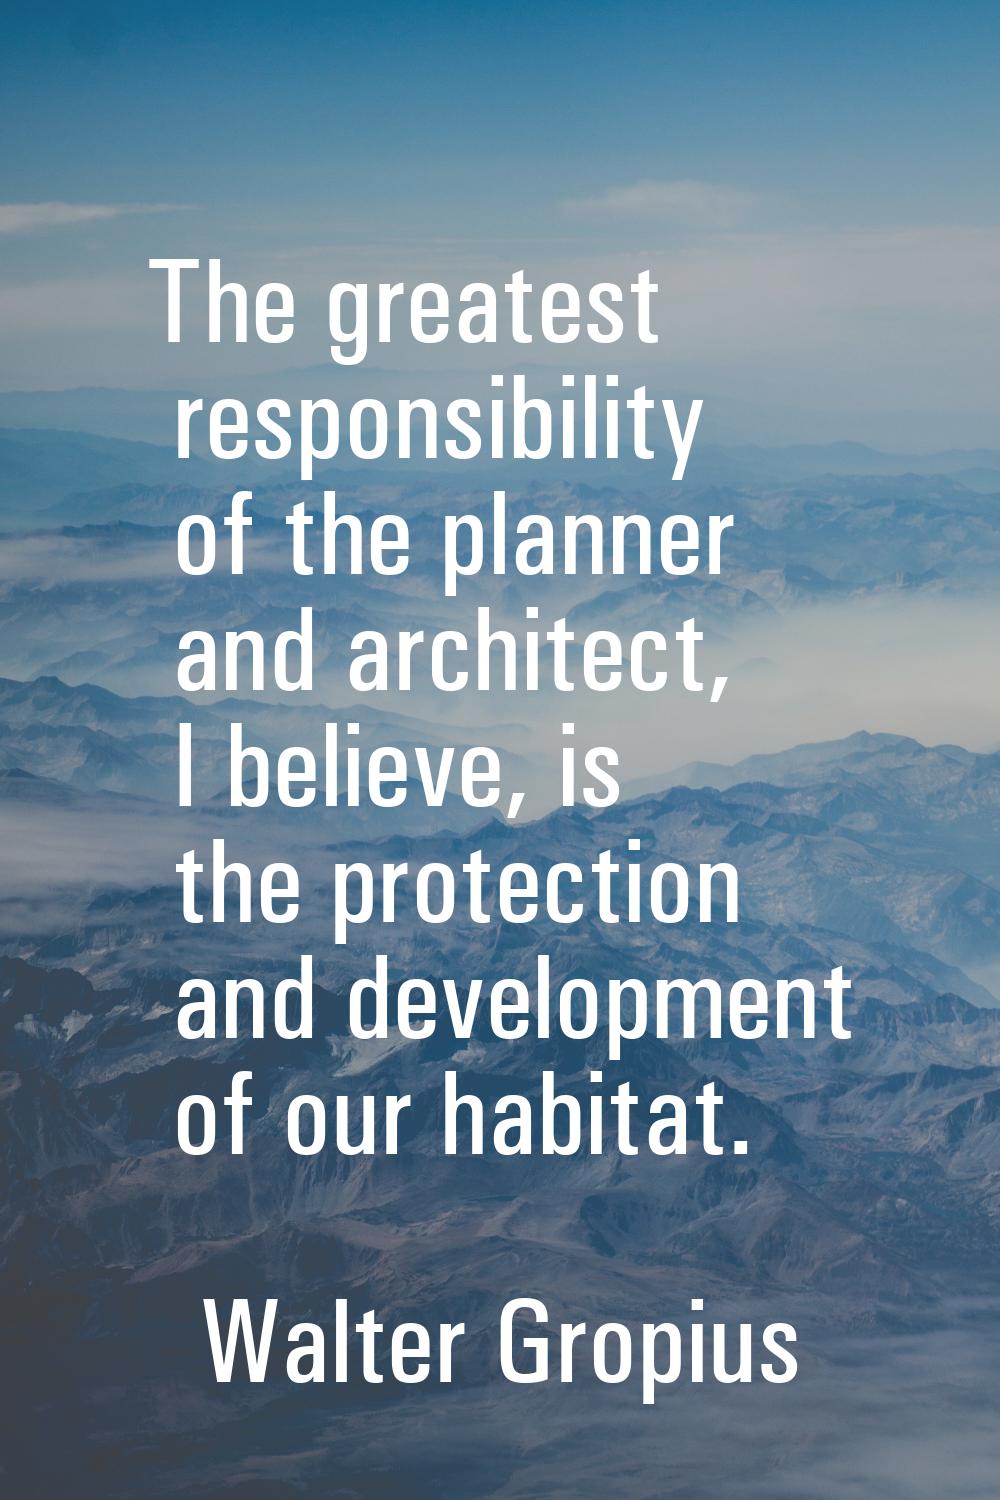 The greatest responsibility of the planner and architect, I believe, is the protection and developm